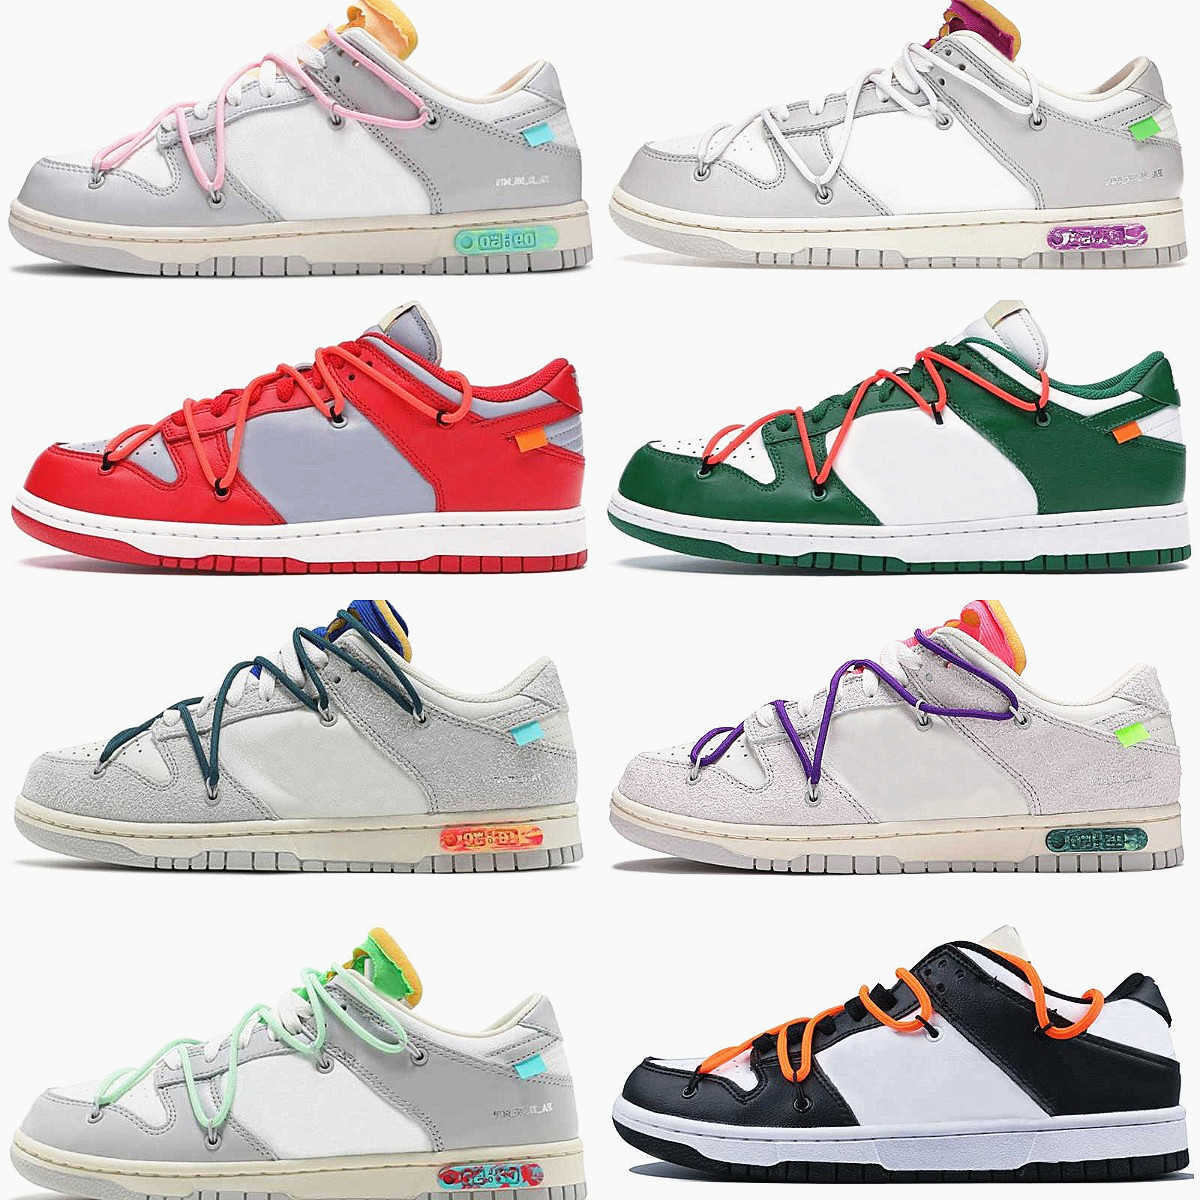 

Designers Dunksb Sports Shoes SBdunk Dear Summer Lot 1 09 Of 50 Collection Red Pine Orange Green SB Dunks Low White OW The 50 TS Trainer Chunky UNC Mens Women Sneakers Y8, Please contact us